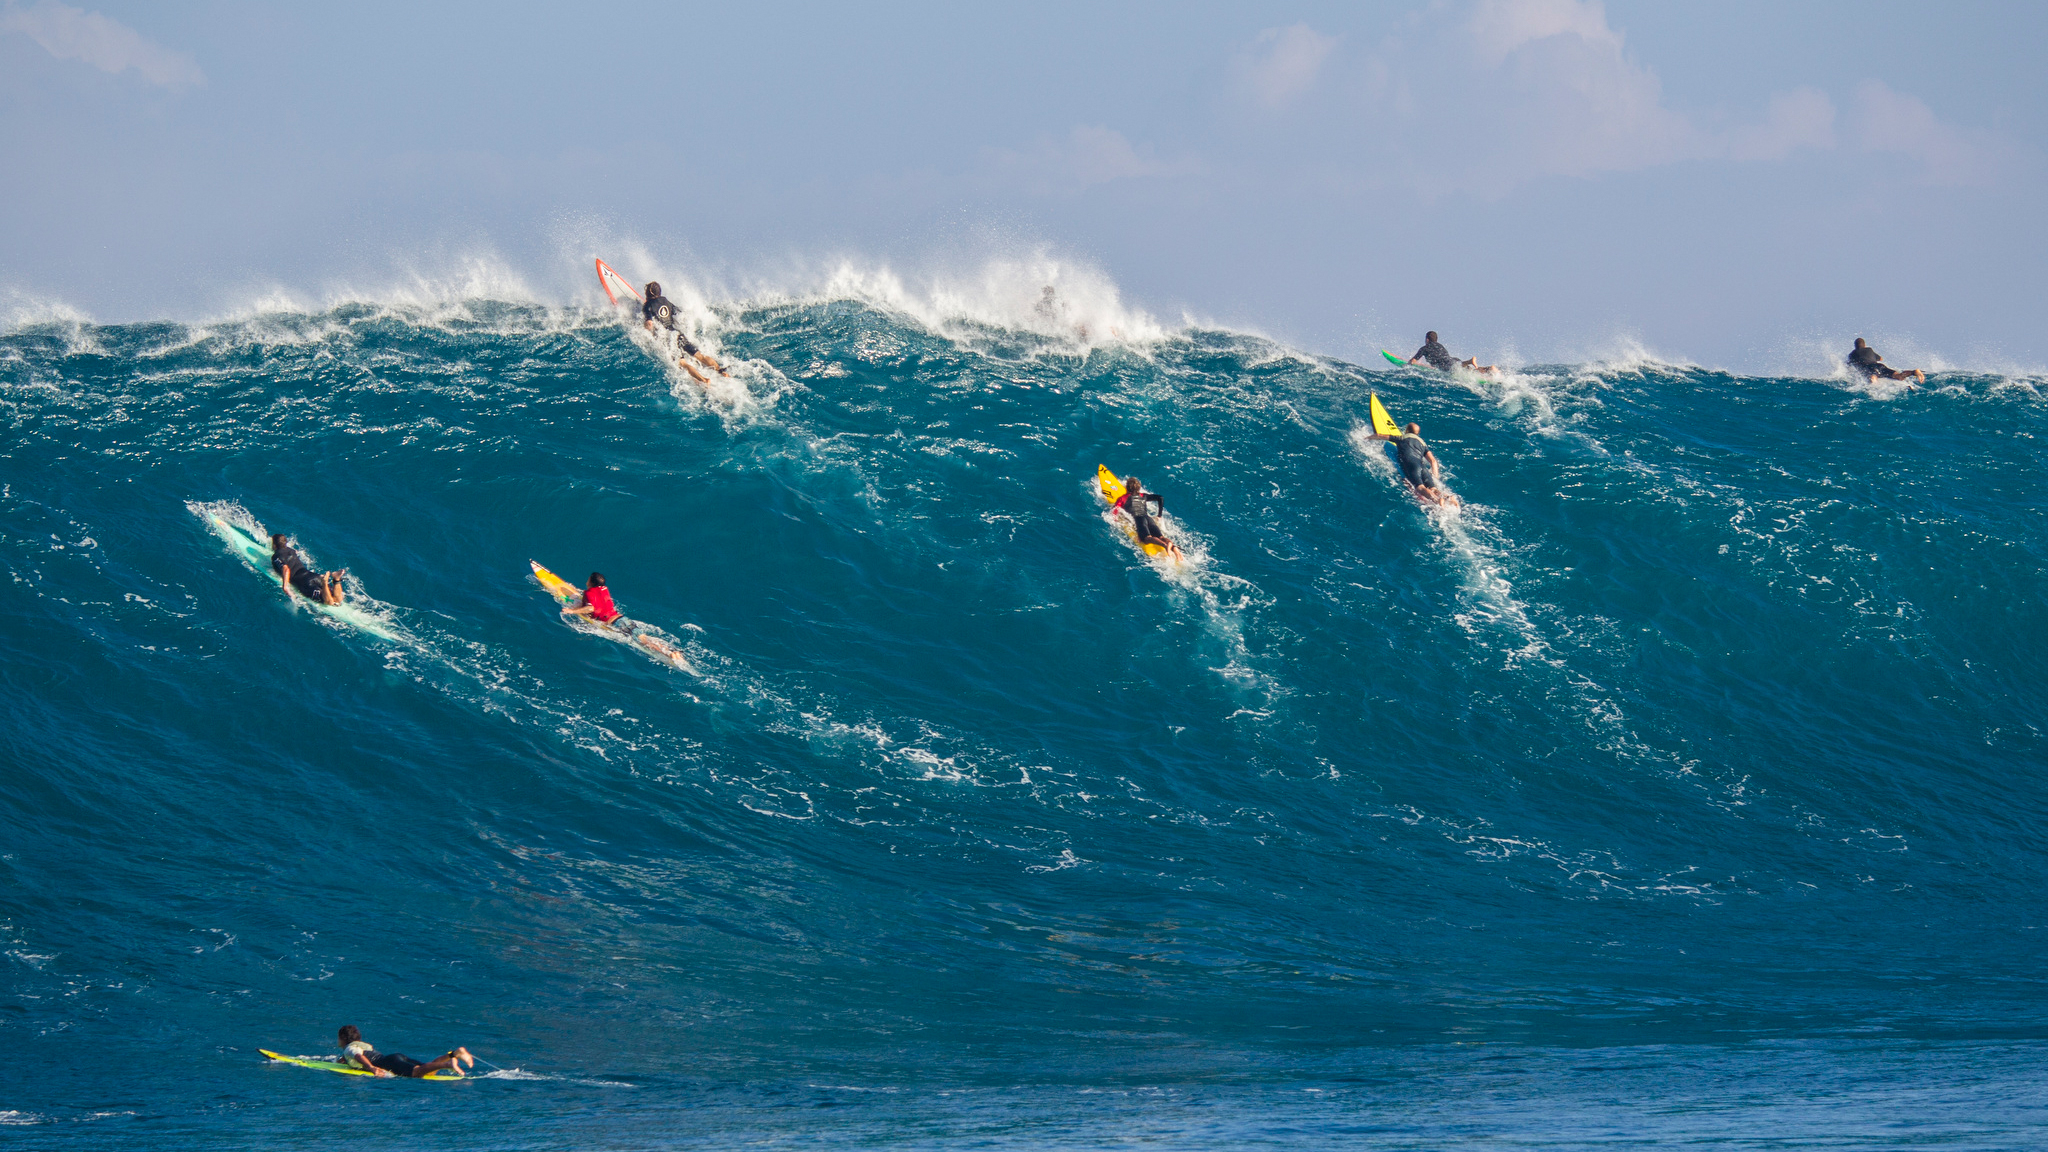 The paddle out